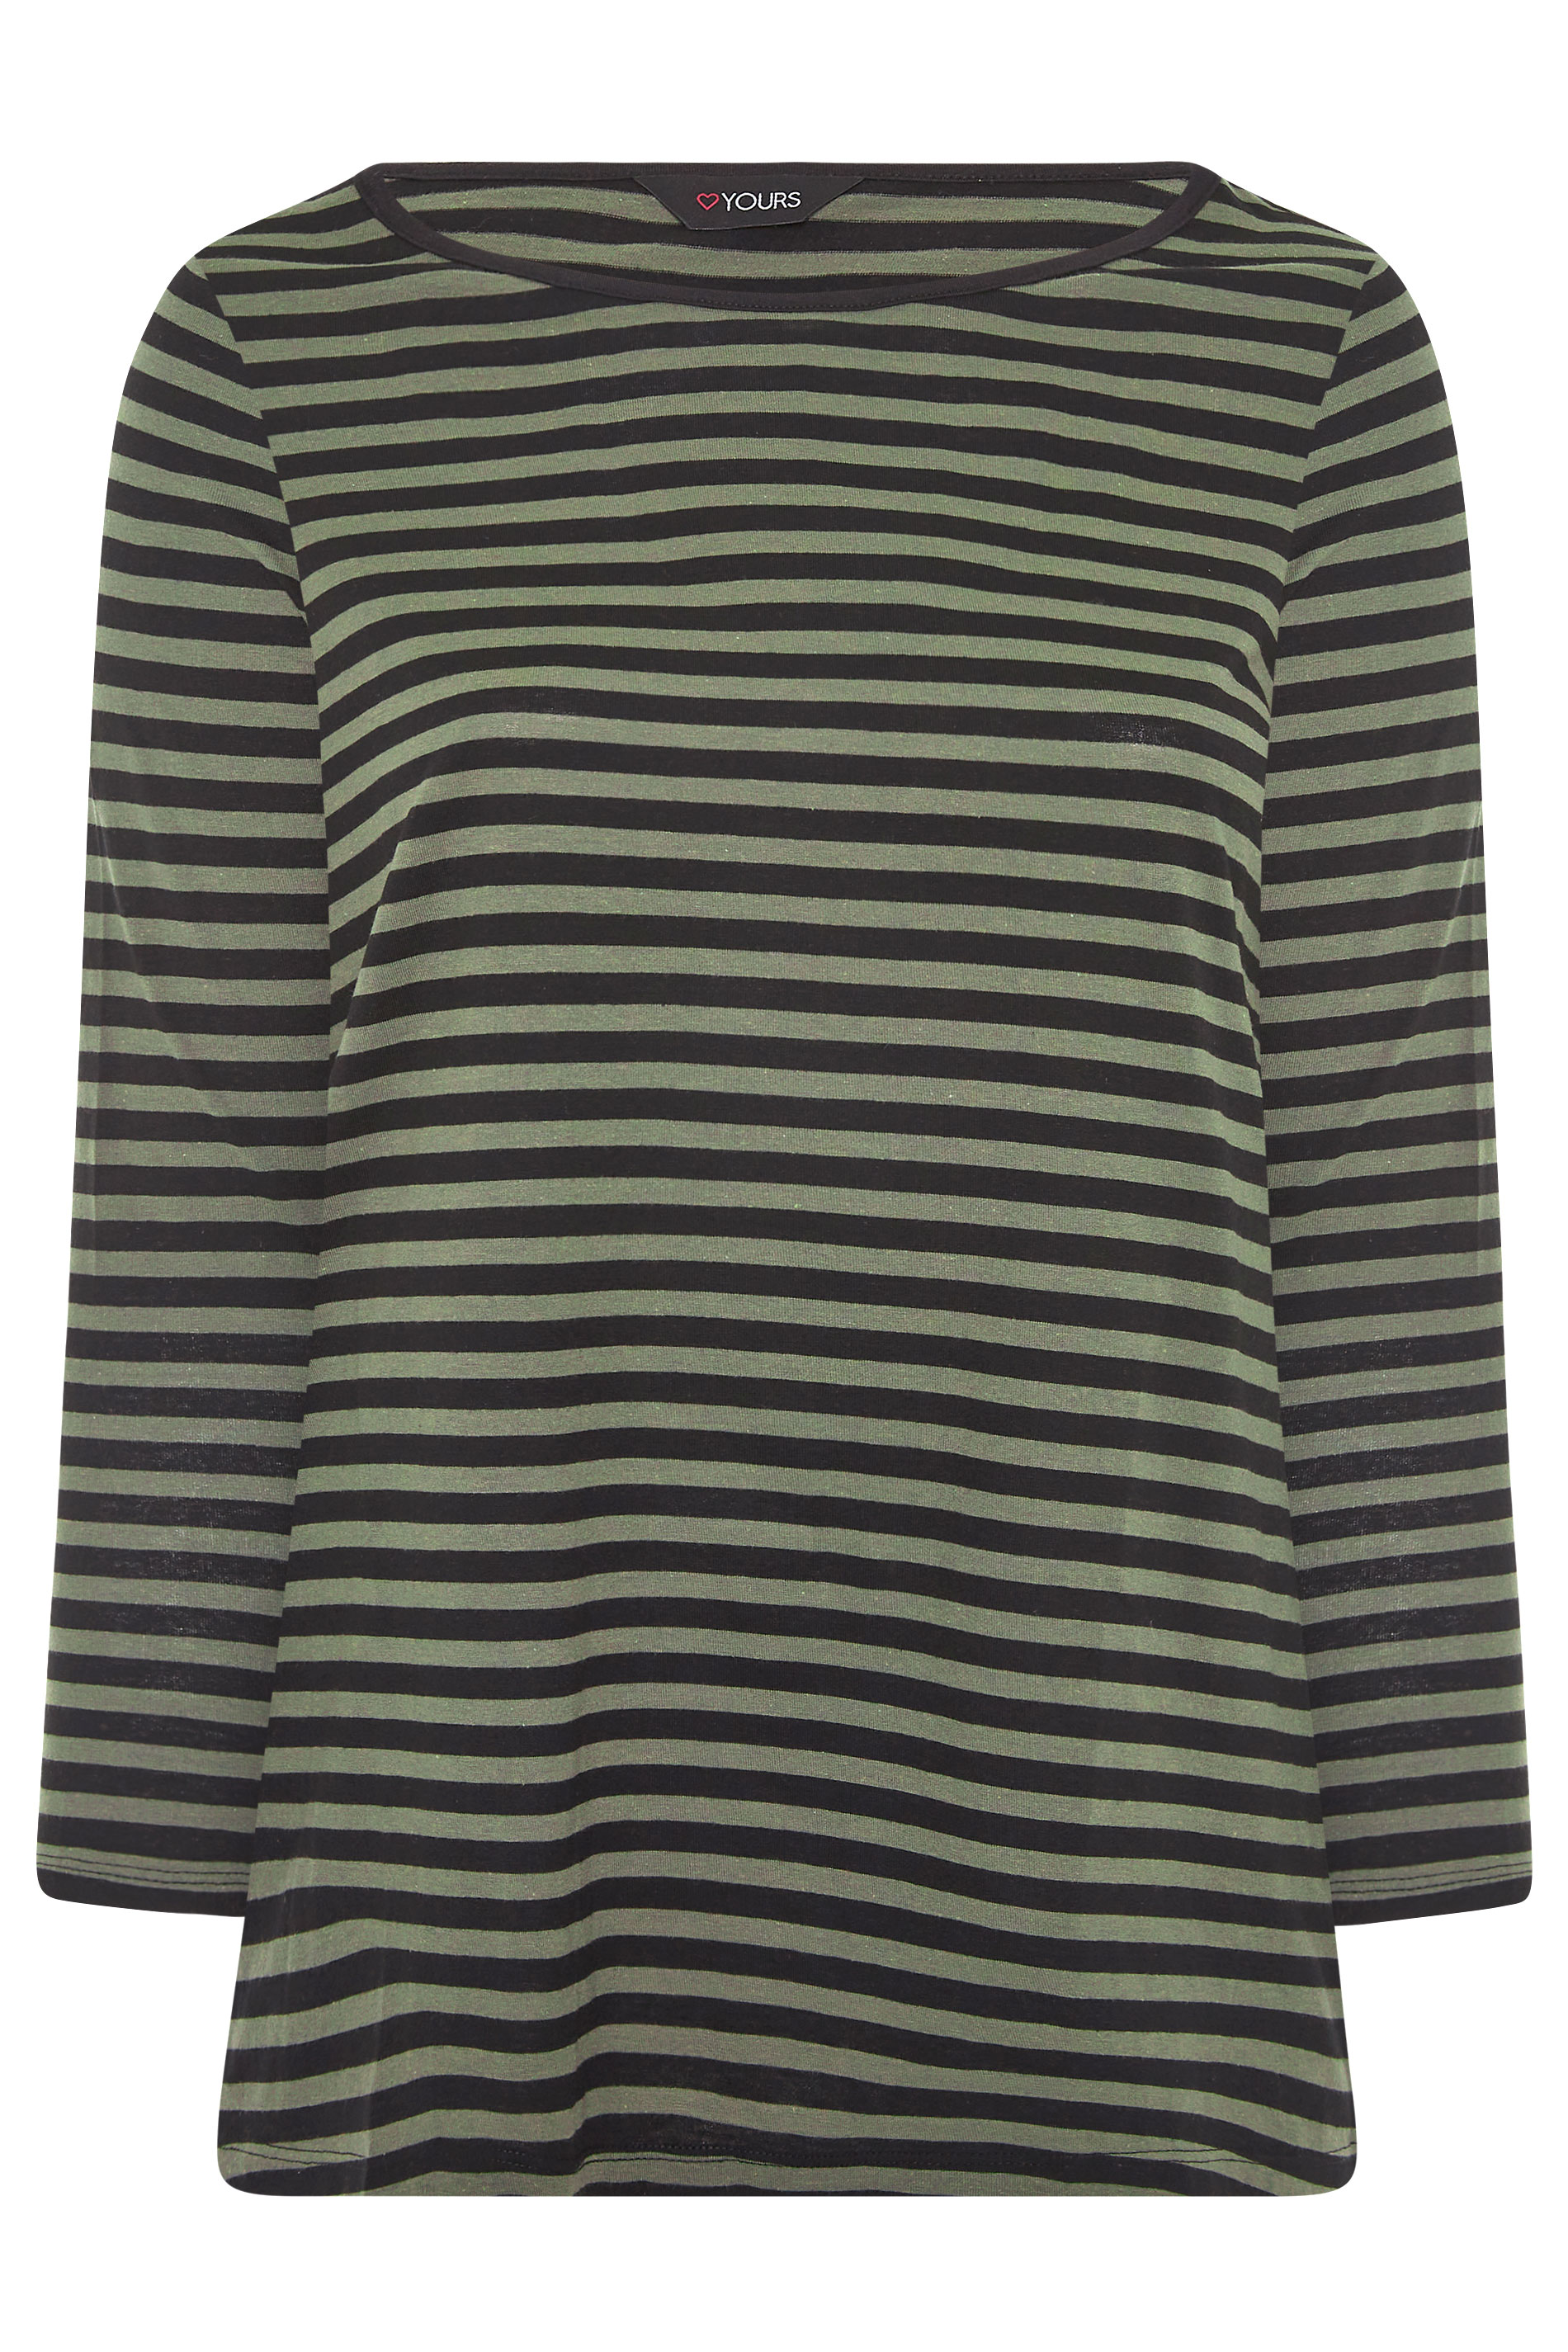 Plus Size Green & Black Stripe Long Sleeve Top | Yours Clothing